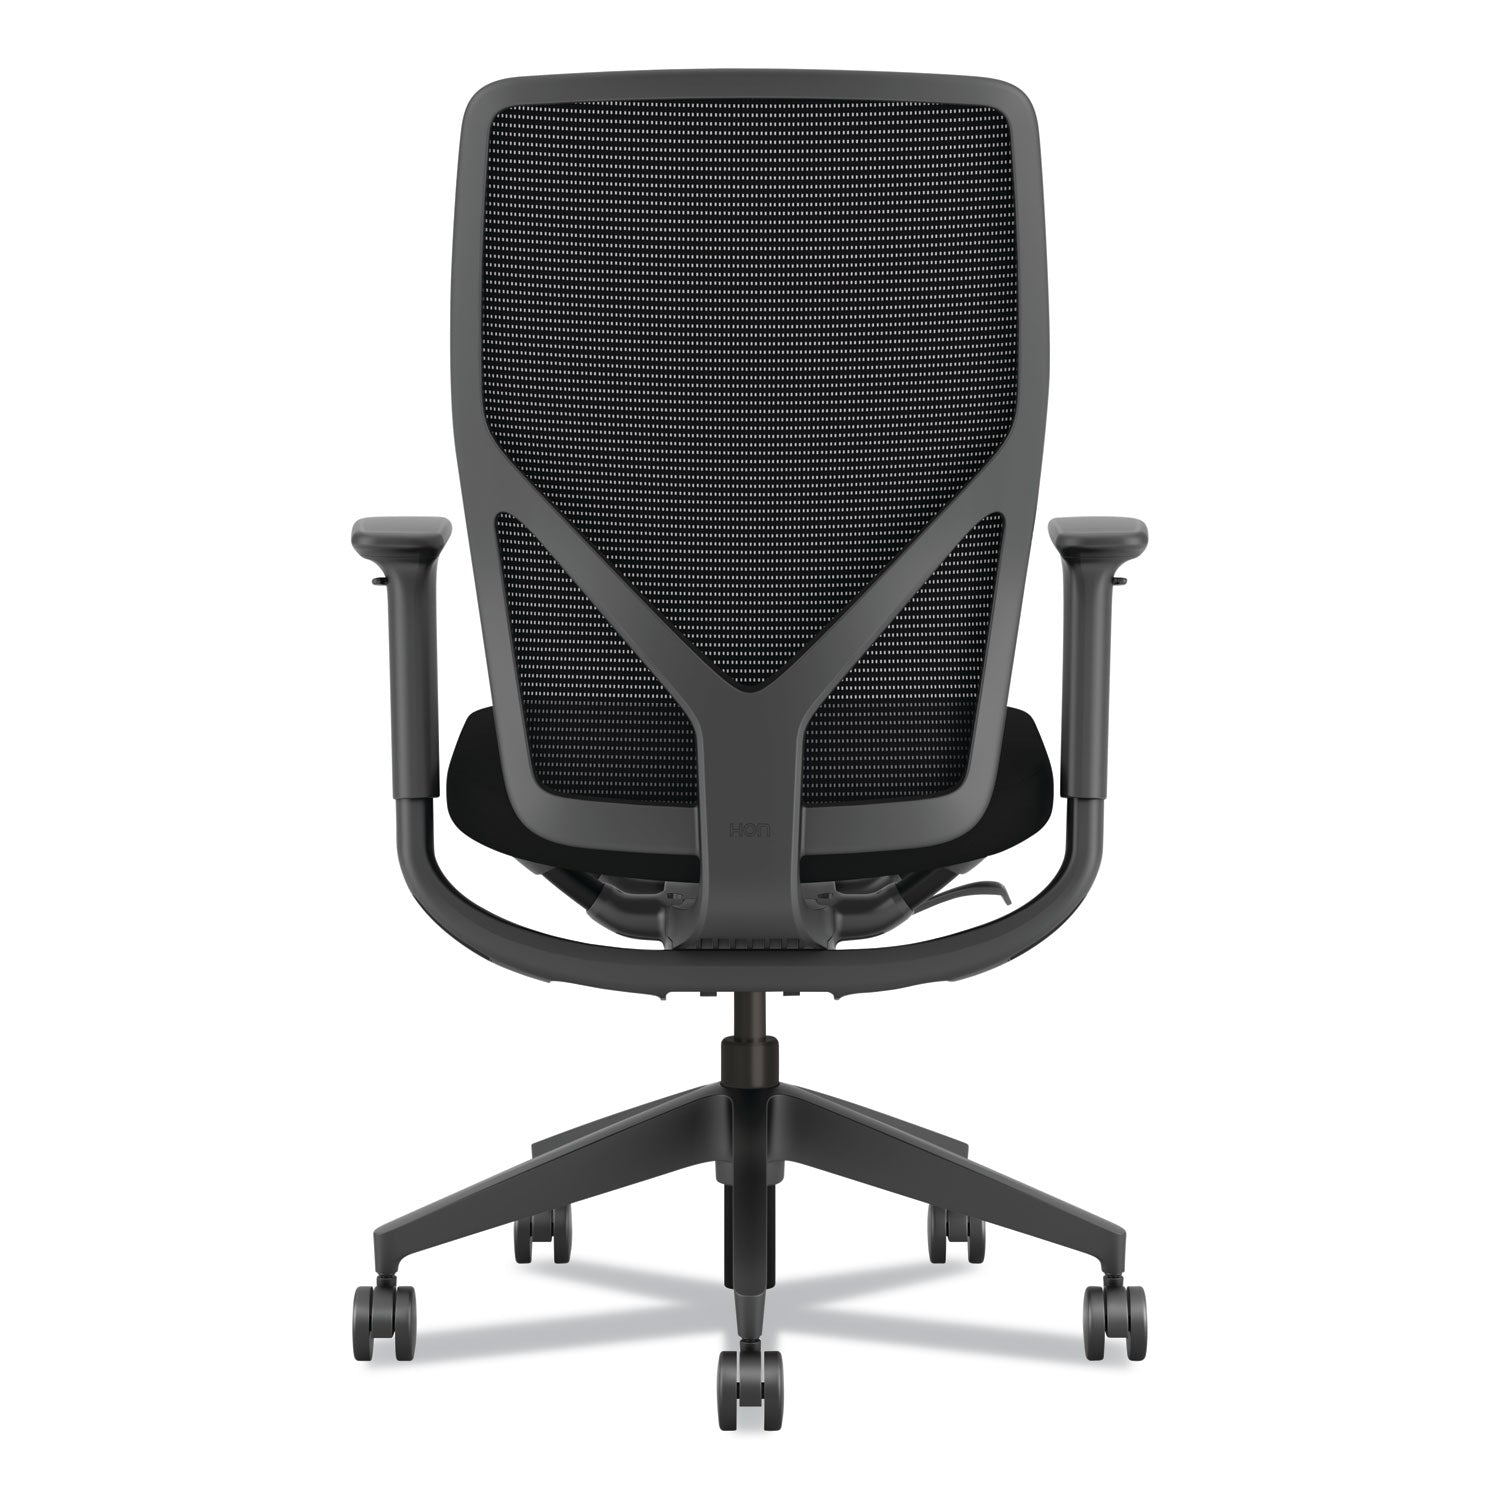 flexion-mesh-back-task-chair-up-to-300-lb-1481-to-197-seat-height-24-back-height-black-ships-in-7-10-business-days_honfxt0stamu10t - 2